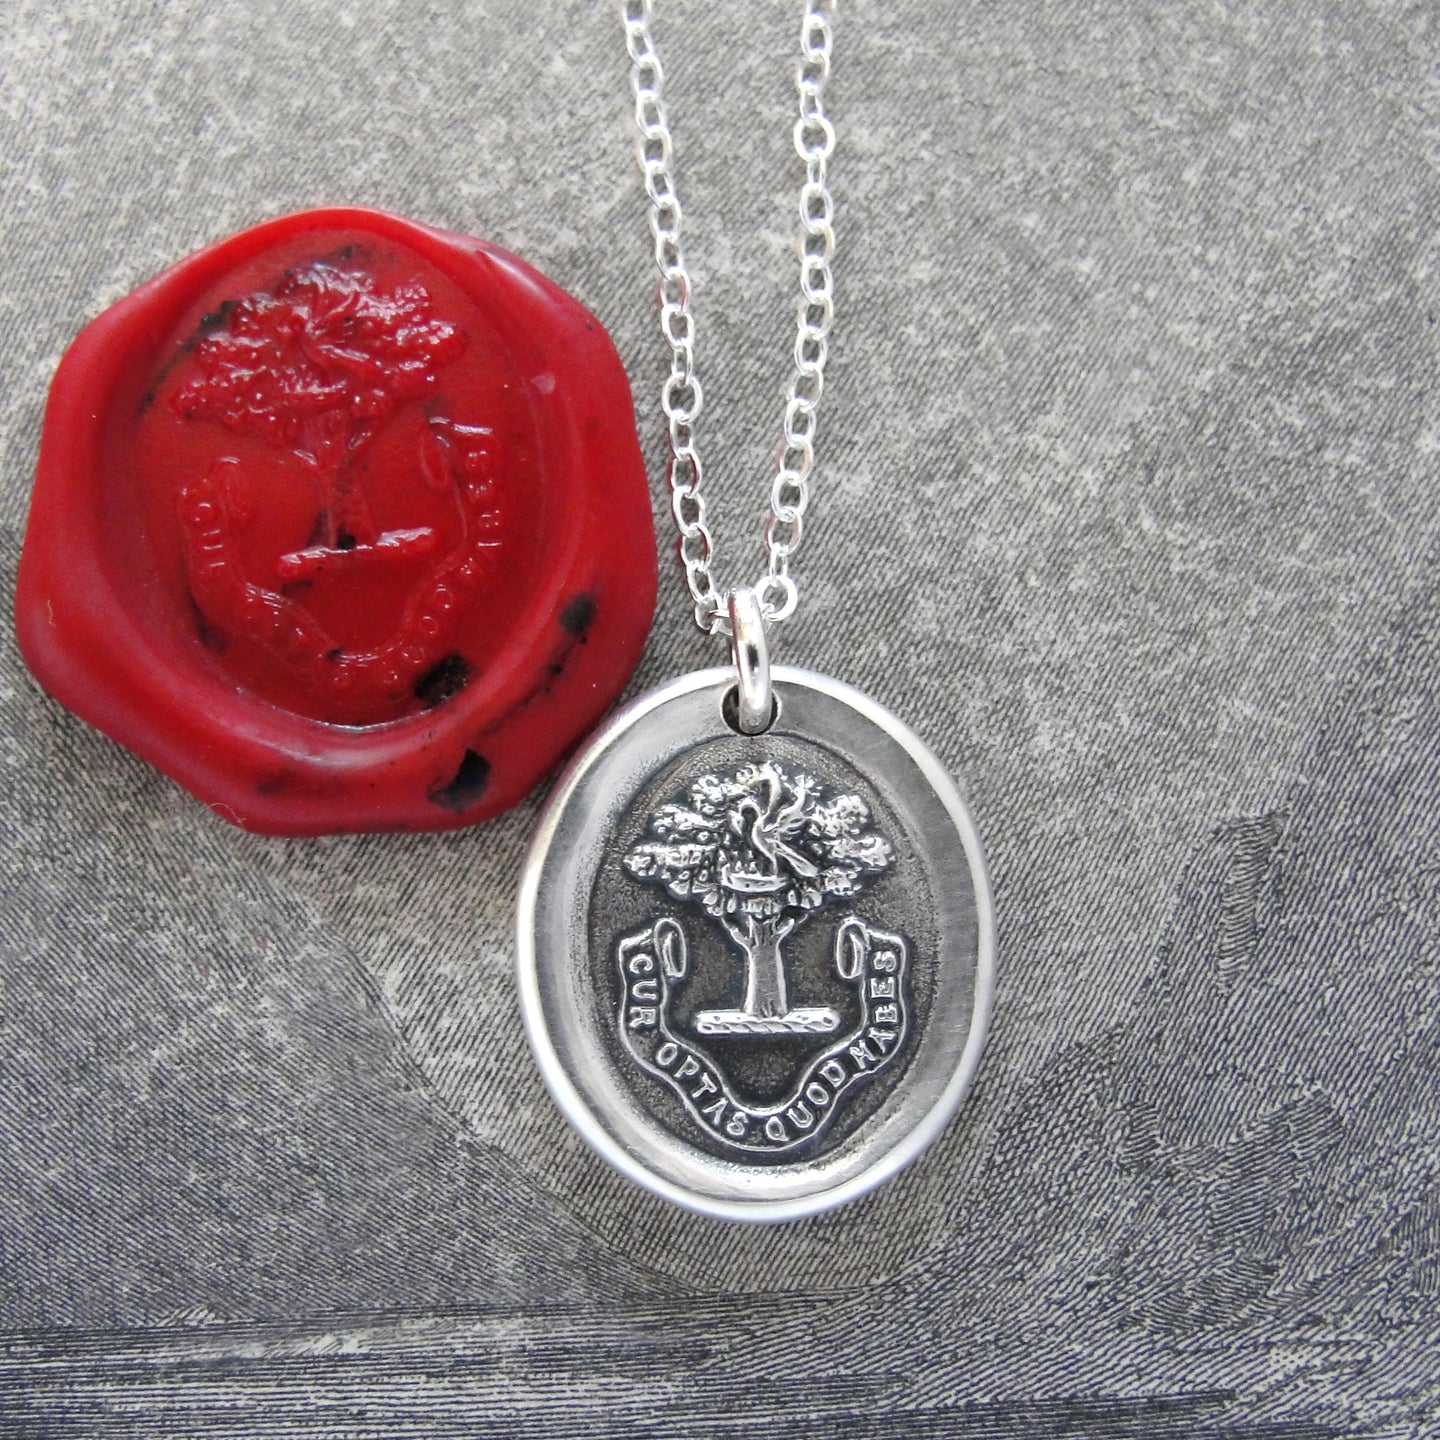 Why Wish For What You Have - Tree of Life Wax Seal Necklace - Silver Wax Seal Jewelry Pelican Piety Latin Motto